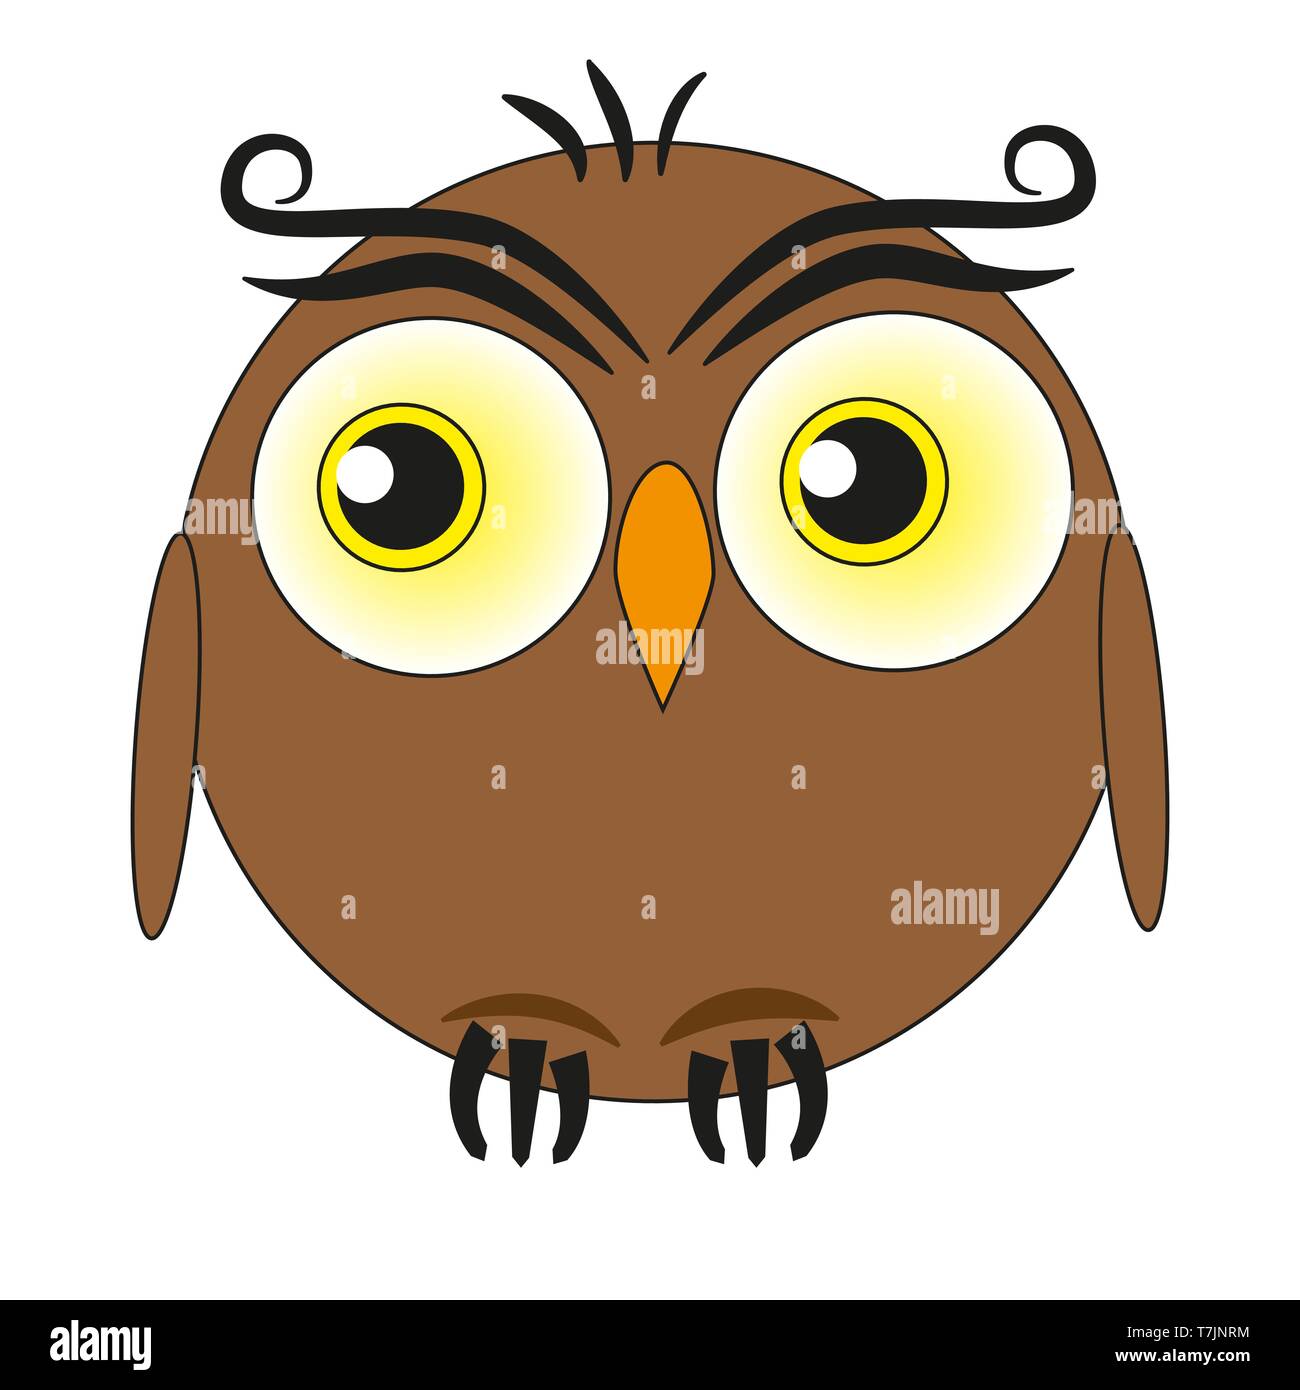 Funny fat owl with big eyes isolated on a white background. Stock Vector